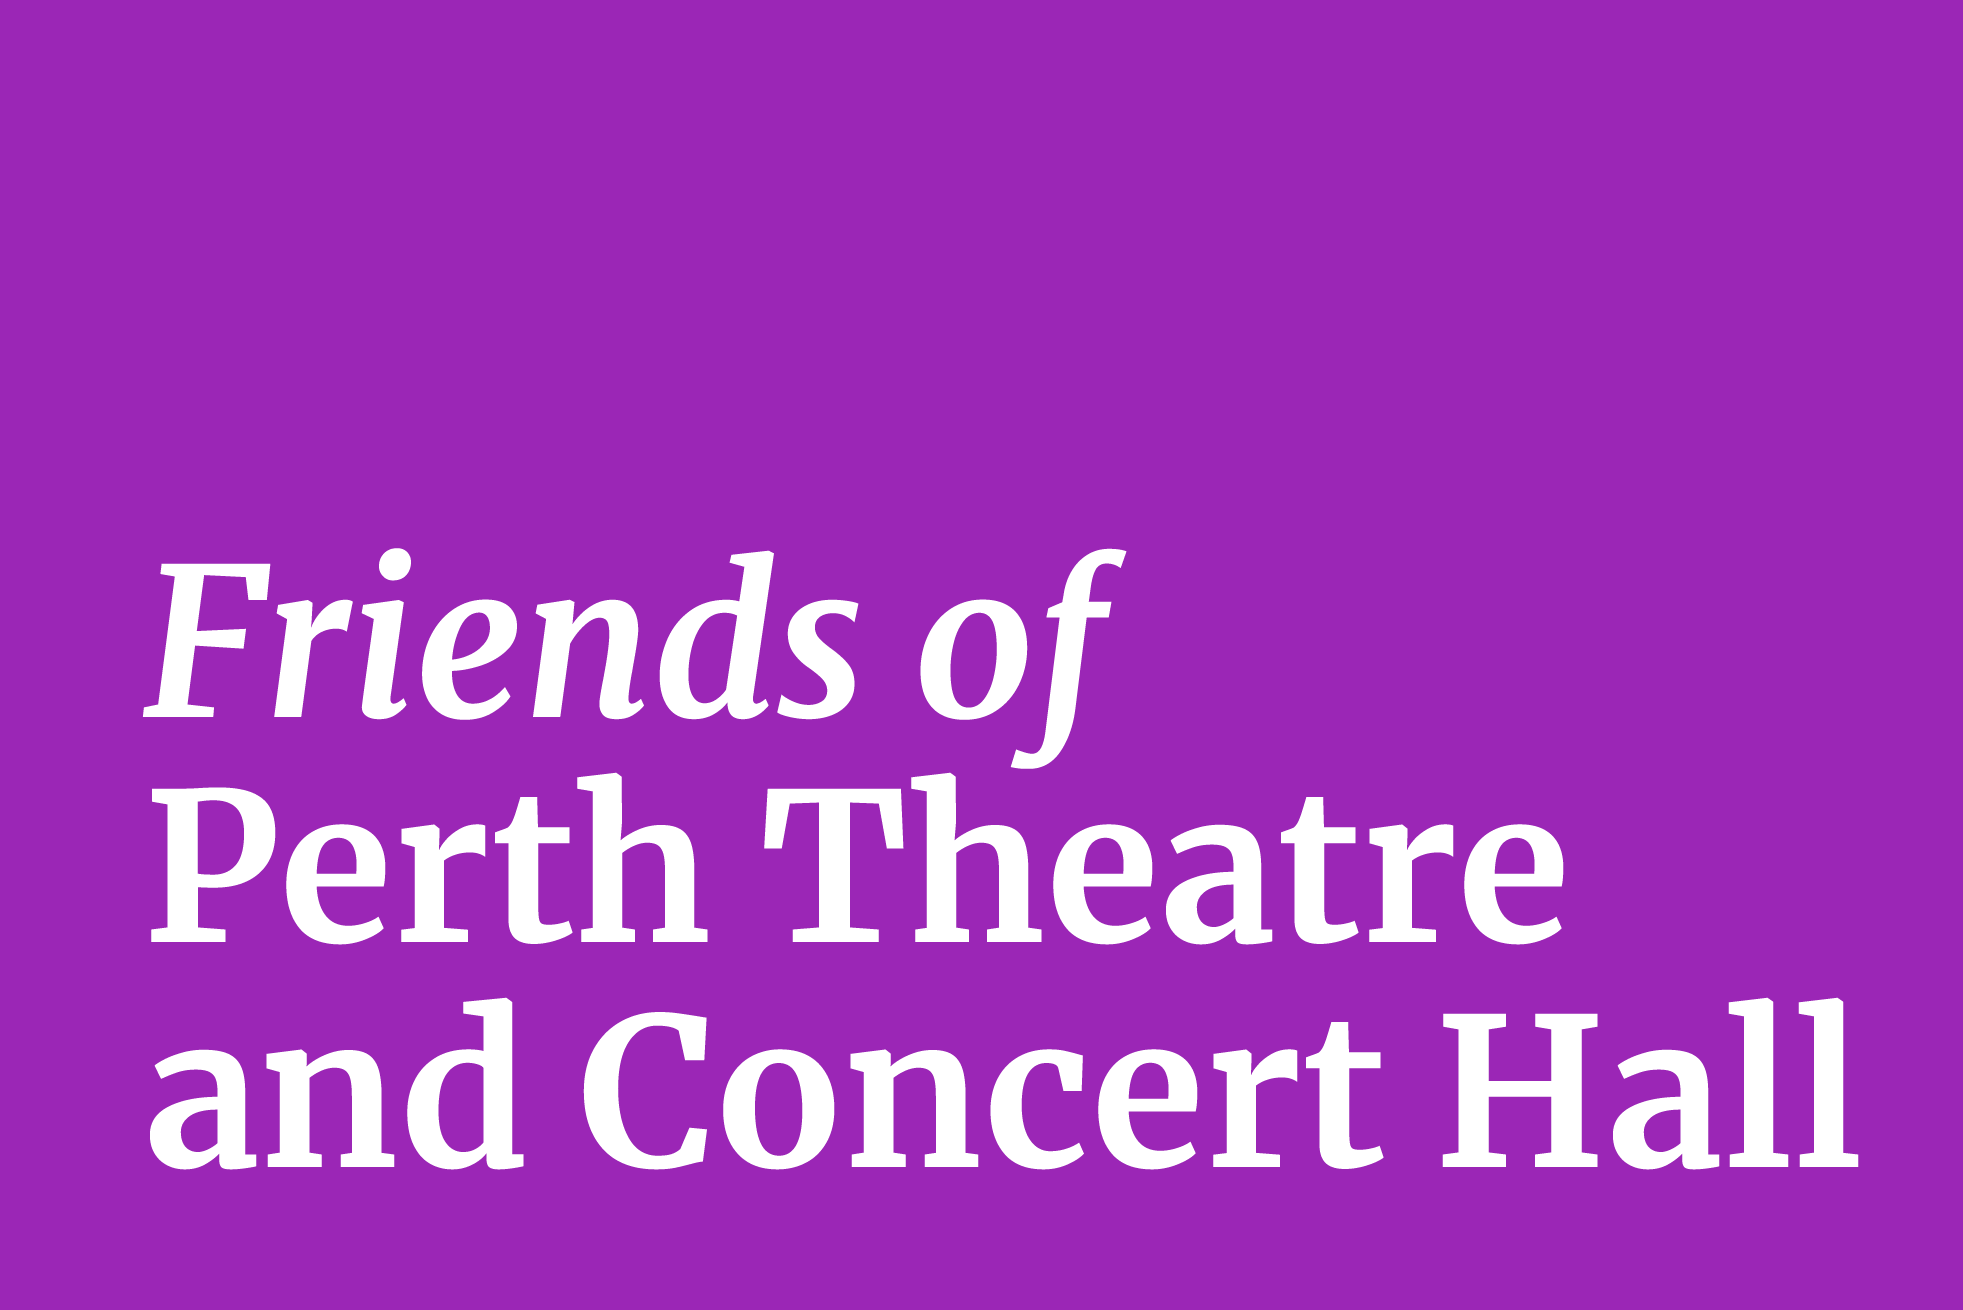 Friends of Perth Theatre and Concert Hall Image